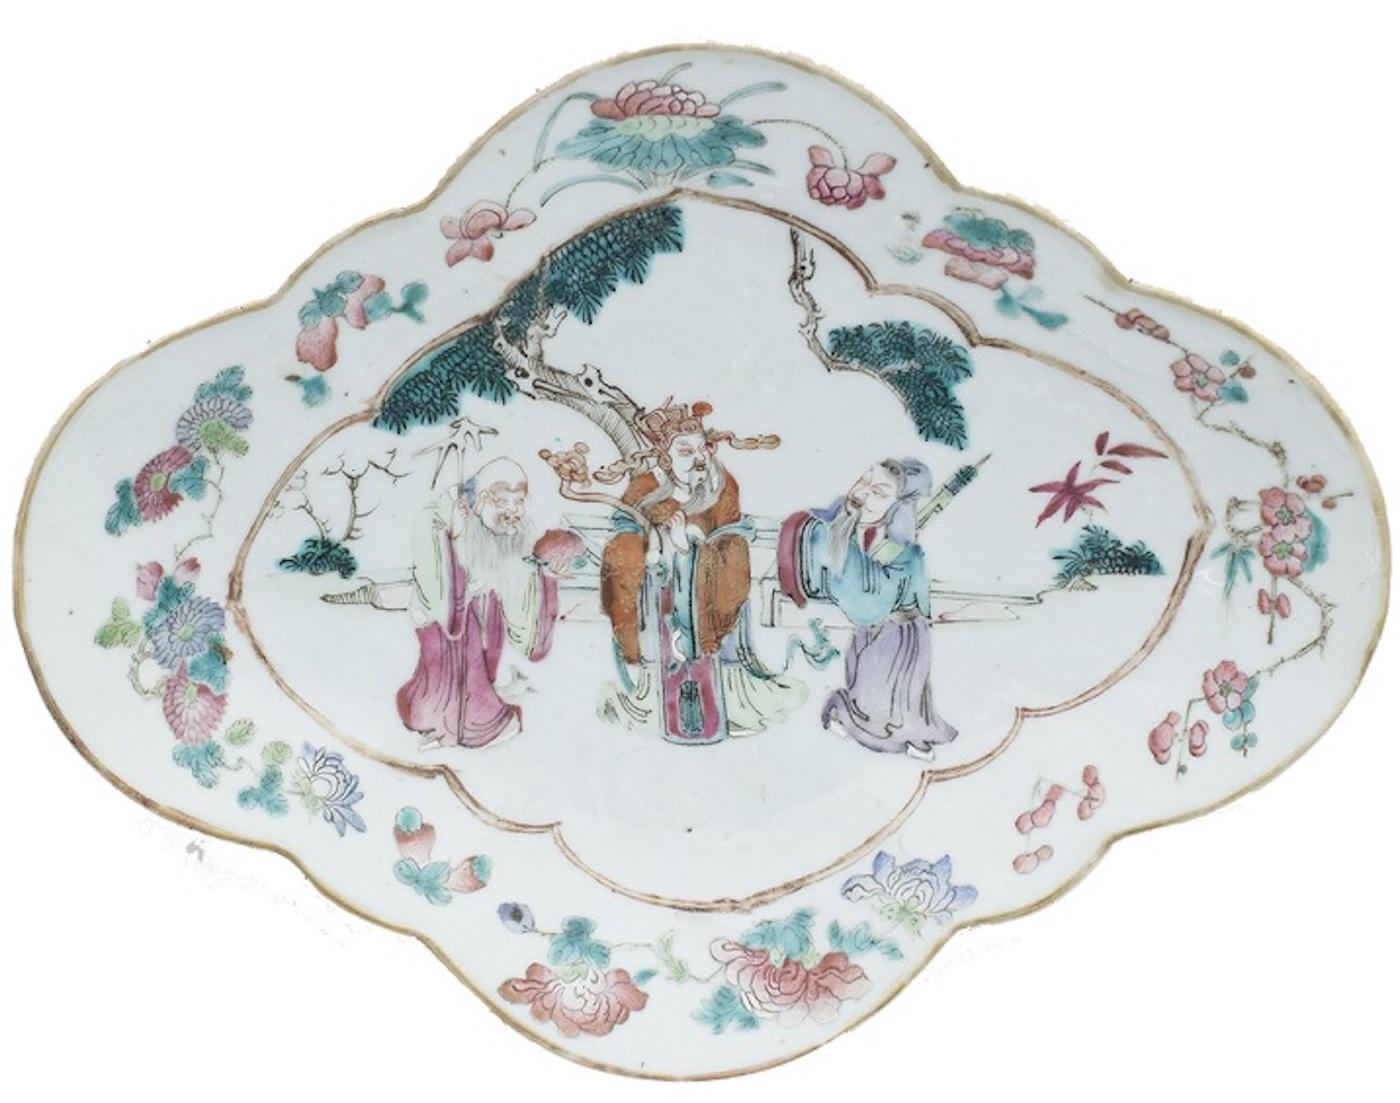 The Chinese shaped-oval polychrome tray is a beautiful decorative object realized in the early 20th century. 

Three sages in landscape inside a frame with small floral compositions, Daoguang six characters mark.

In very good condition.